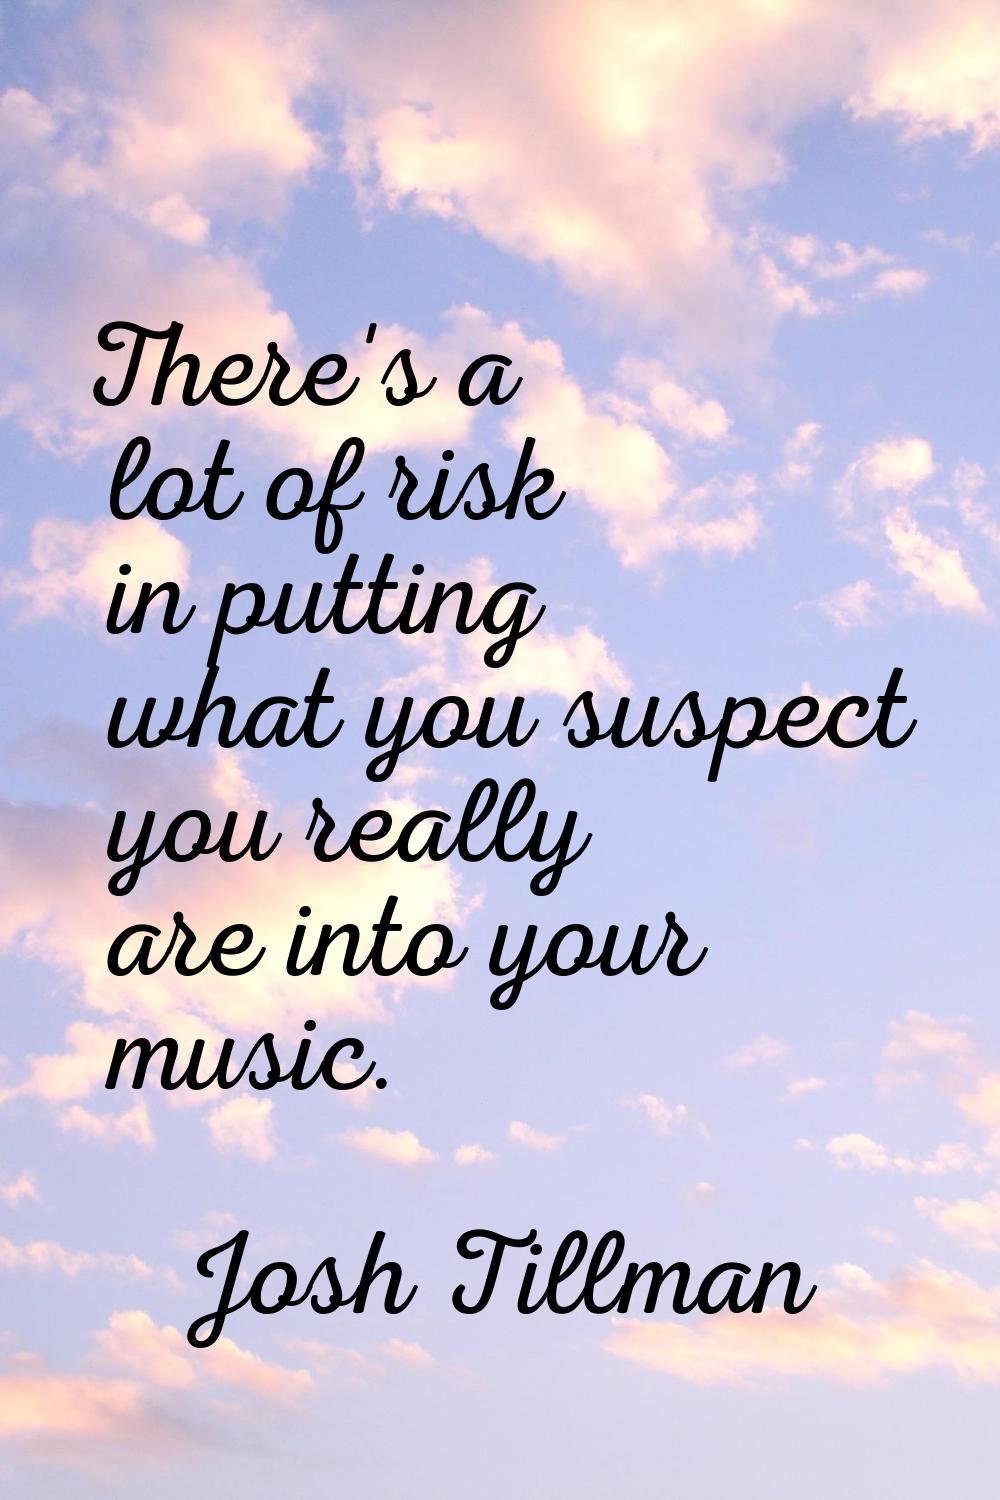 There's a lot of risk in putting what you suspect you really are into your music.